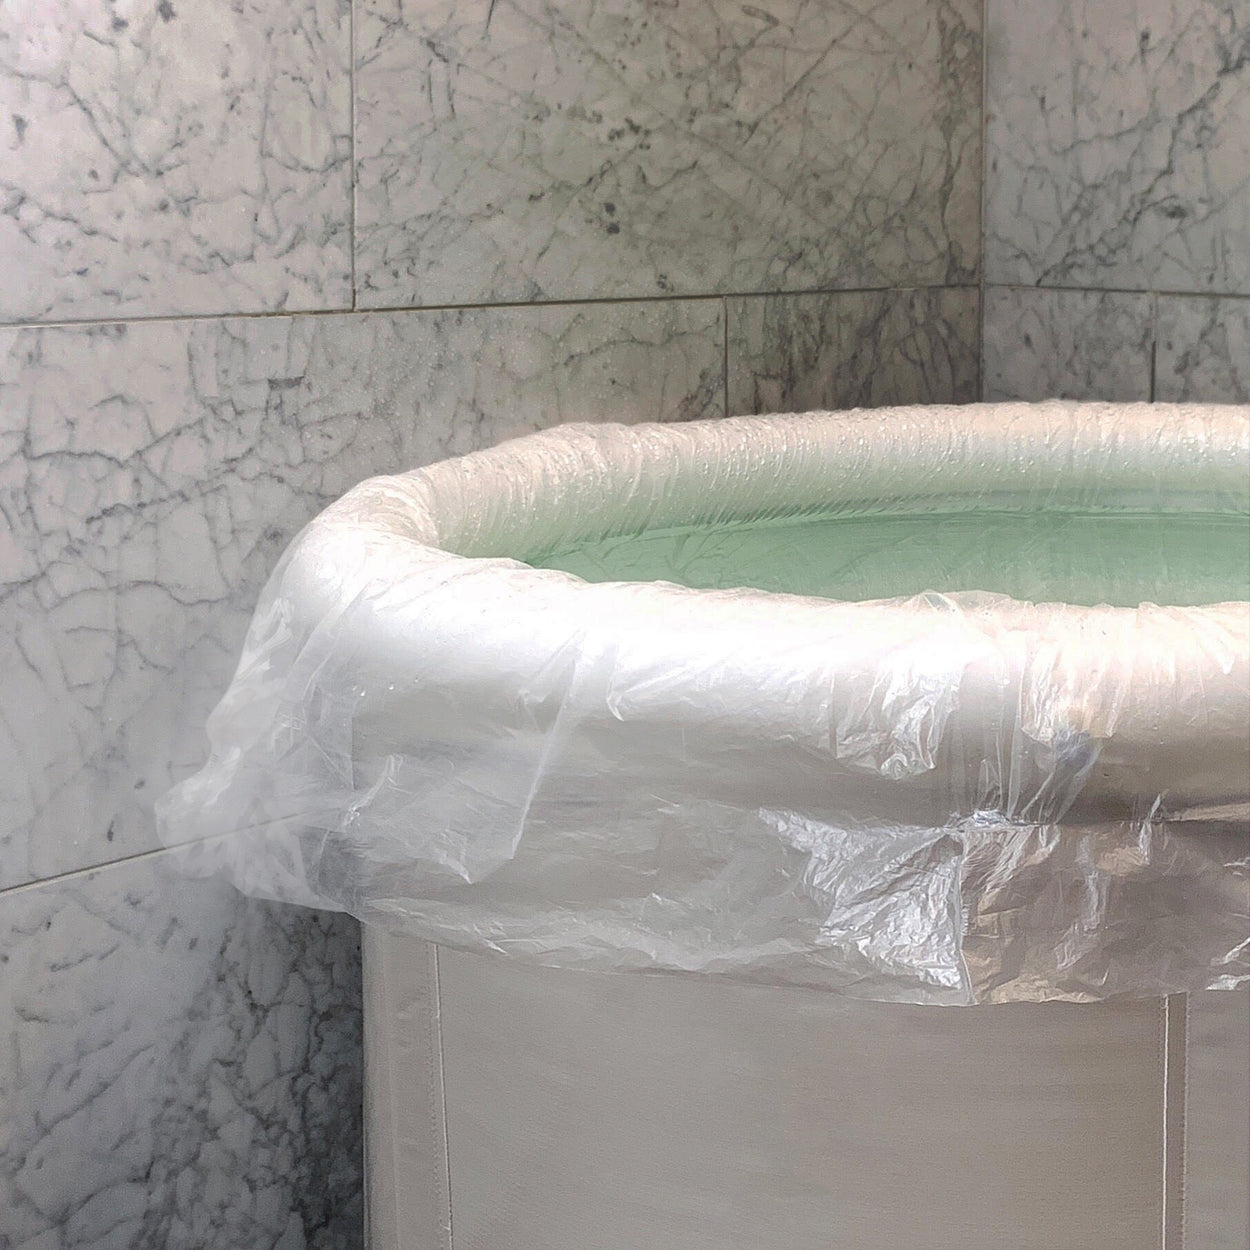 Bathtub Liners Made From What Material?